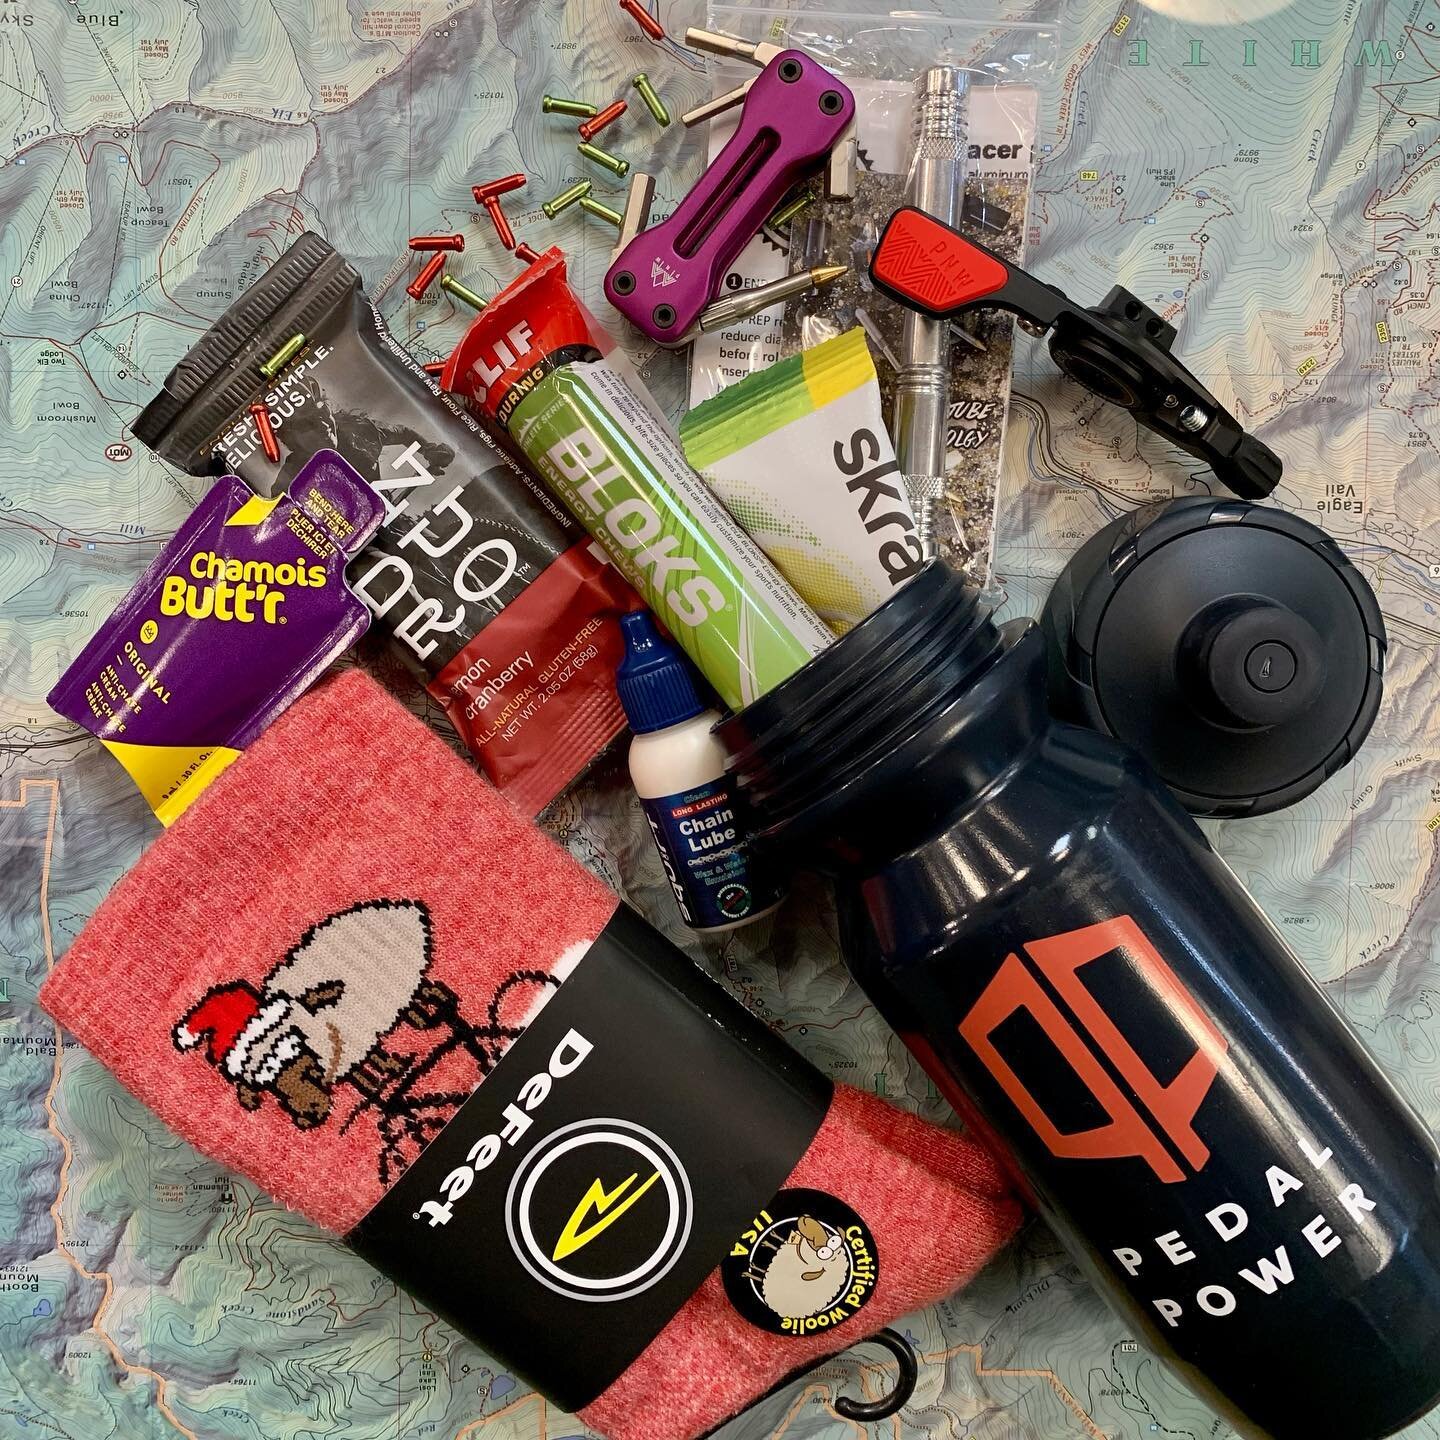 Last minute gifts and stocking stuffers?

Make it special by stuffing a water bottle with hand-picked goodies. We&rsquo;re always happy to help with recommendations of our favorite gear! We&rsquo;ll even play Santa&rsquo;s helper and give you 10% off